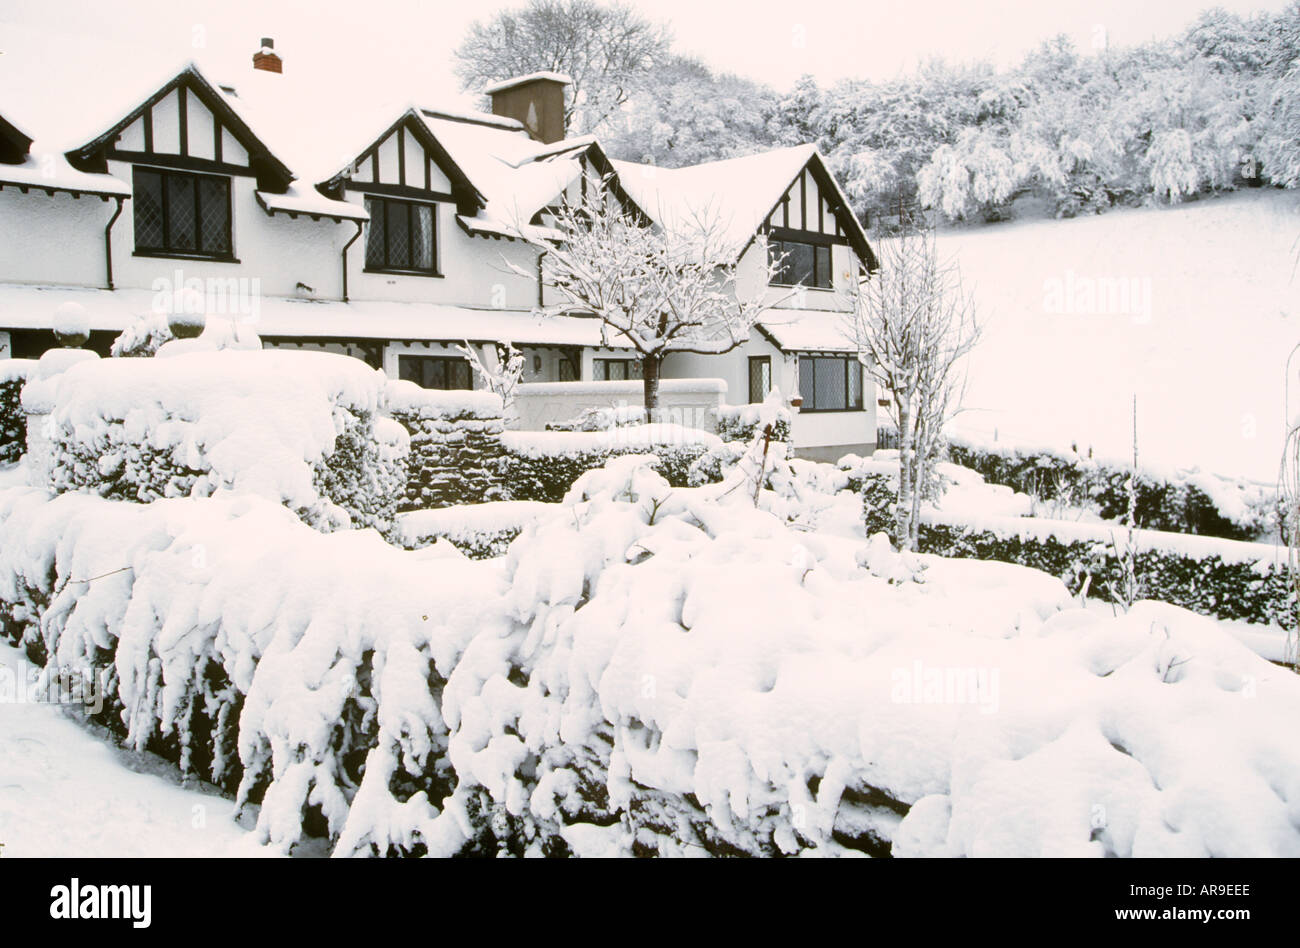 UK Wales Near Cardiff Cottage in snow SB Stock Photo